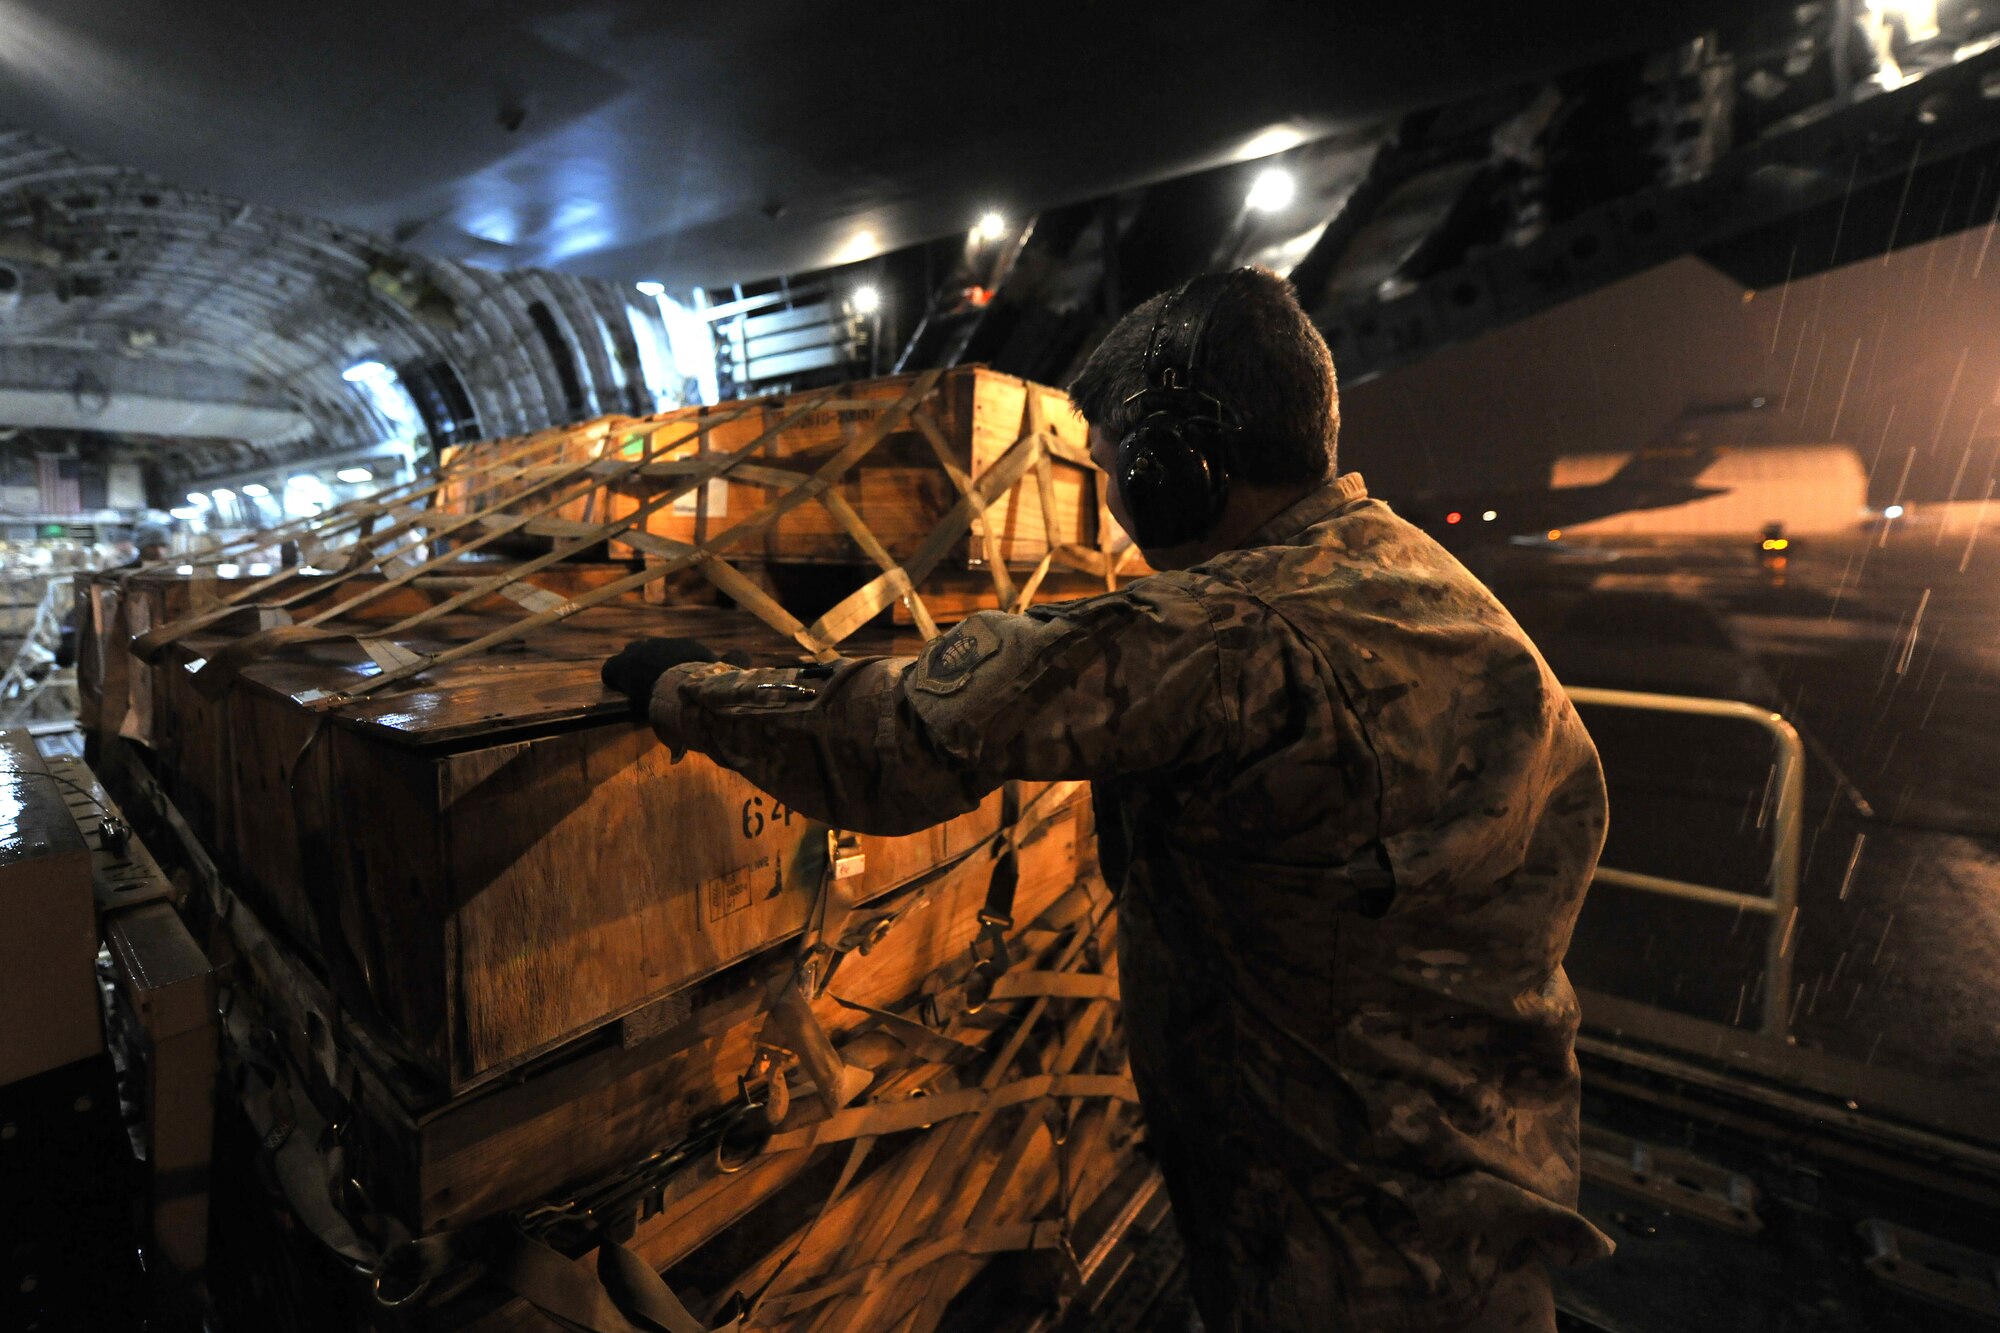 Master Sgt. Joel Graham, 455th Expeditionary Aerial Port Squadron, Detachment 3 chief, loads pallets onto a C-17 Globemaster III at Camp Marmal, Afghanistan, Jan 30, 2013. Airmen from the 455th EAPS are forward deployed from Bagram Airfield, Afghanistan, to support the main Air Force contingency cargo staging yard in Regional Command-North. (U.S. Air Force photo/Senior Airman Chris Willis)